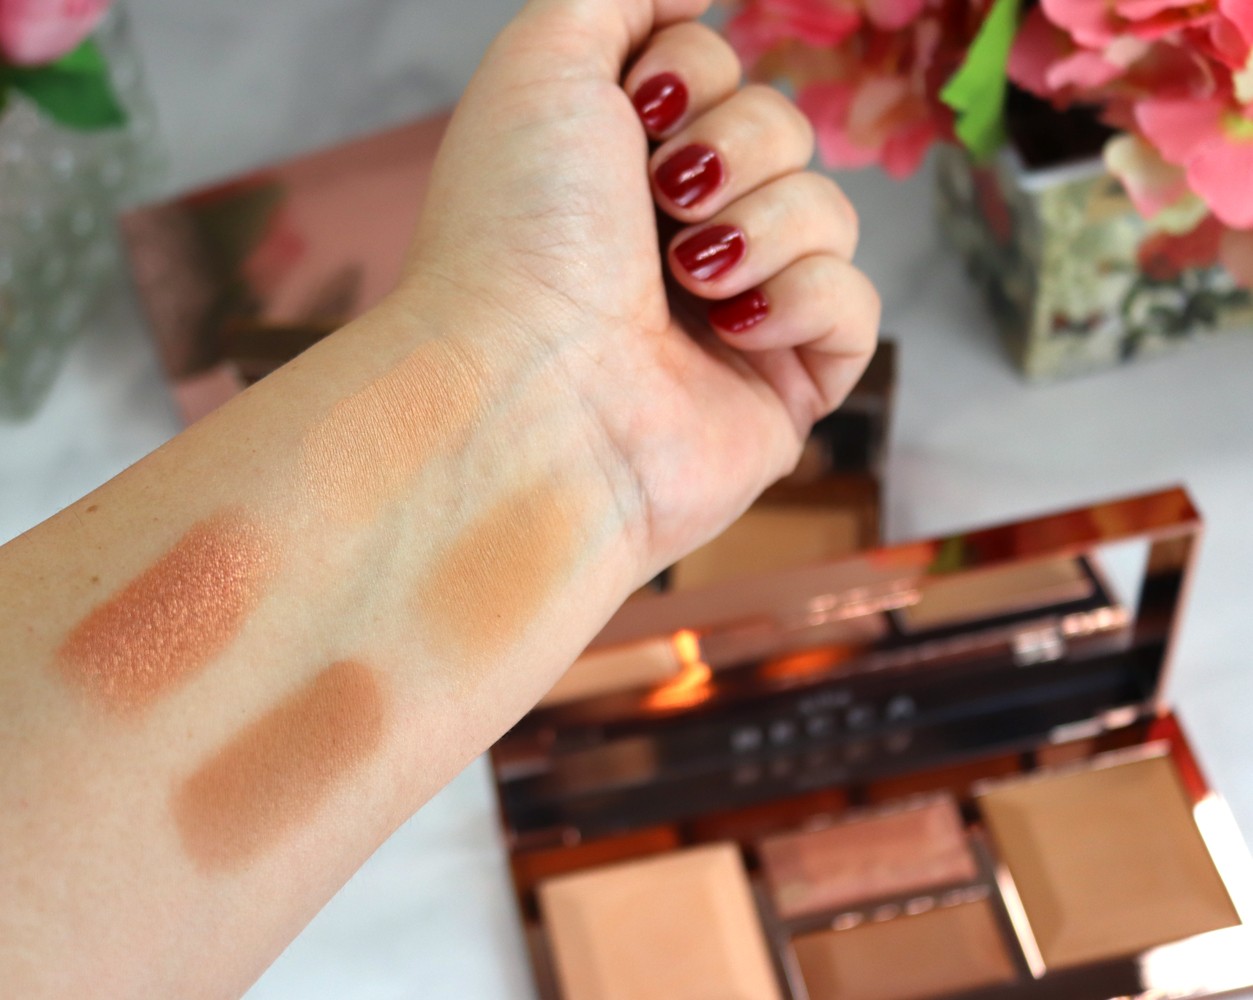 Becca Be a Light Medium to Deep Palette Review - New Sephora Favorites from Urban Decay, Becca and Hourglass featured by popular Los Angeles cruelty free beauty blogger, My Beauty Bunny